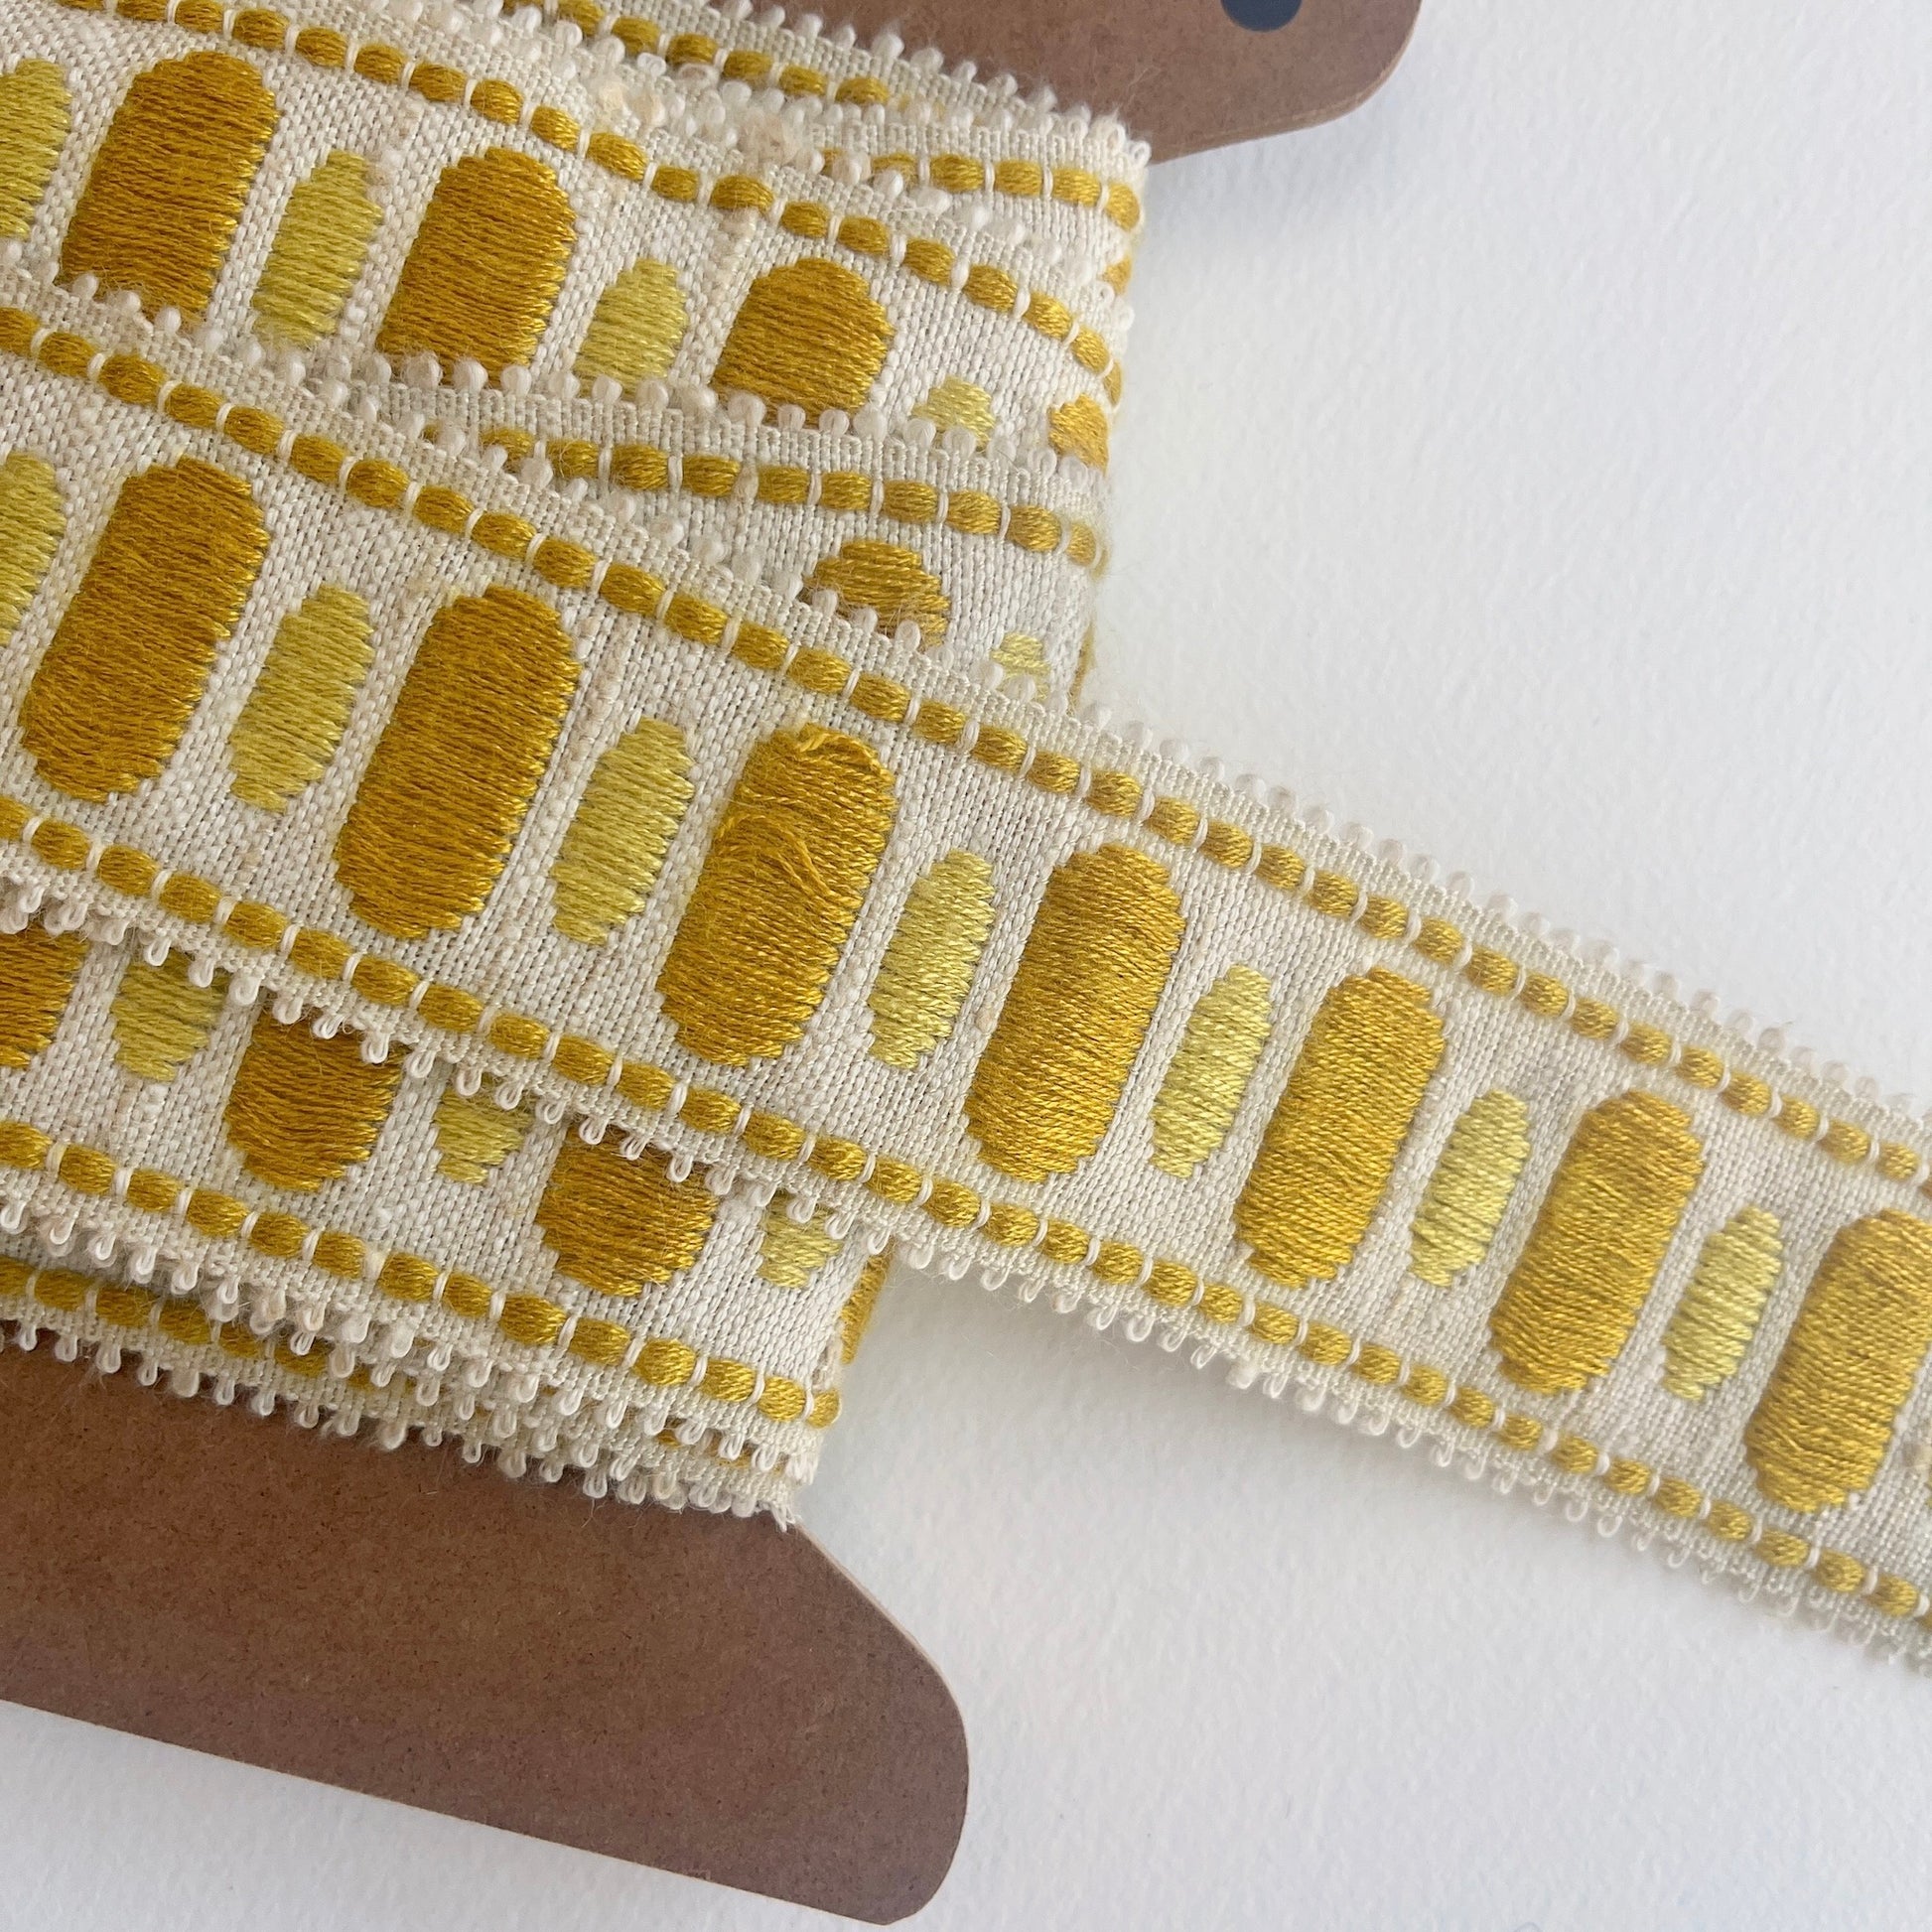 gold and mustard vintage, retro upholstery trim in made by Dralon - Bayer Fibre textile, manufactured in the 1970s.